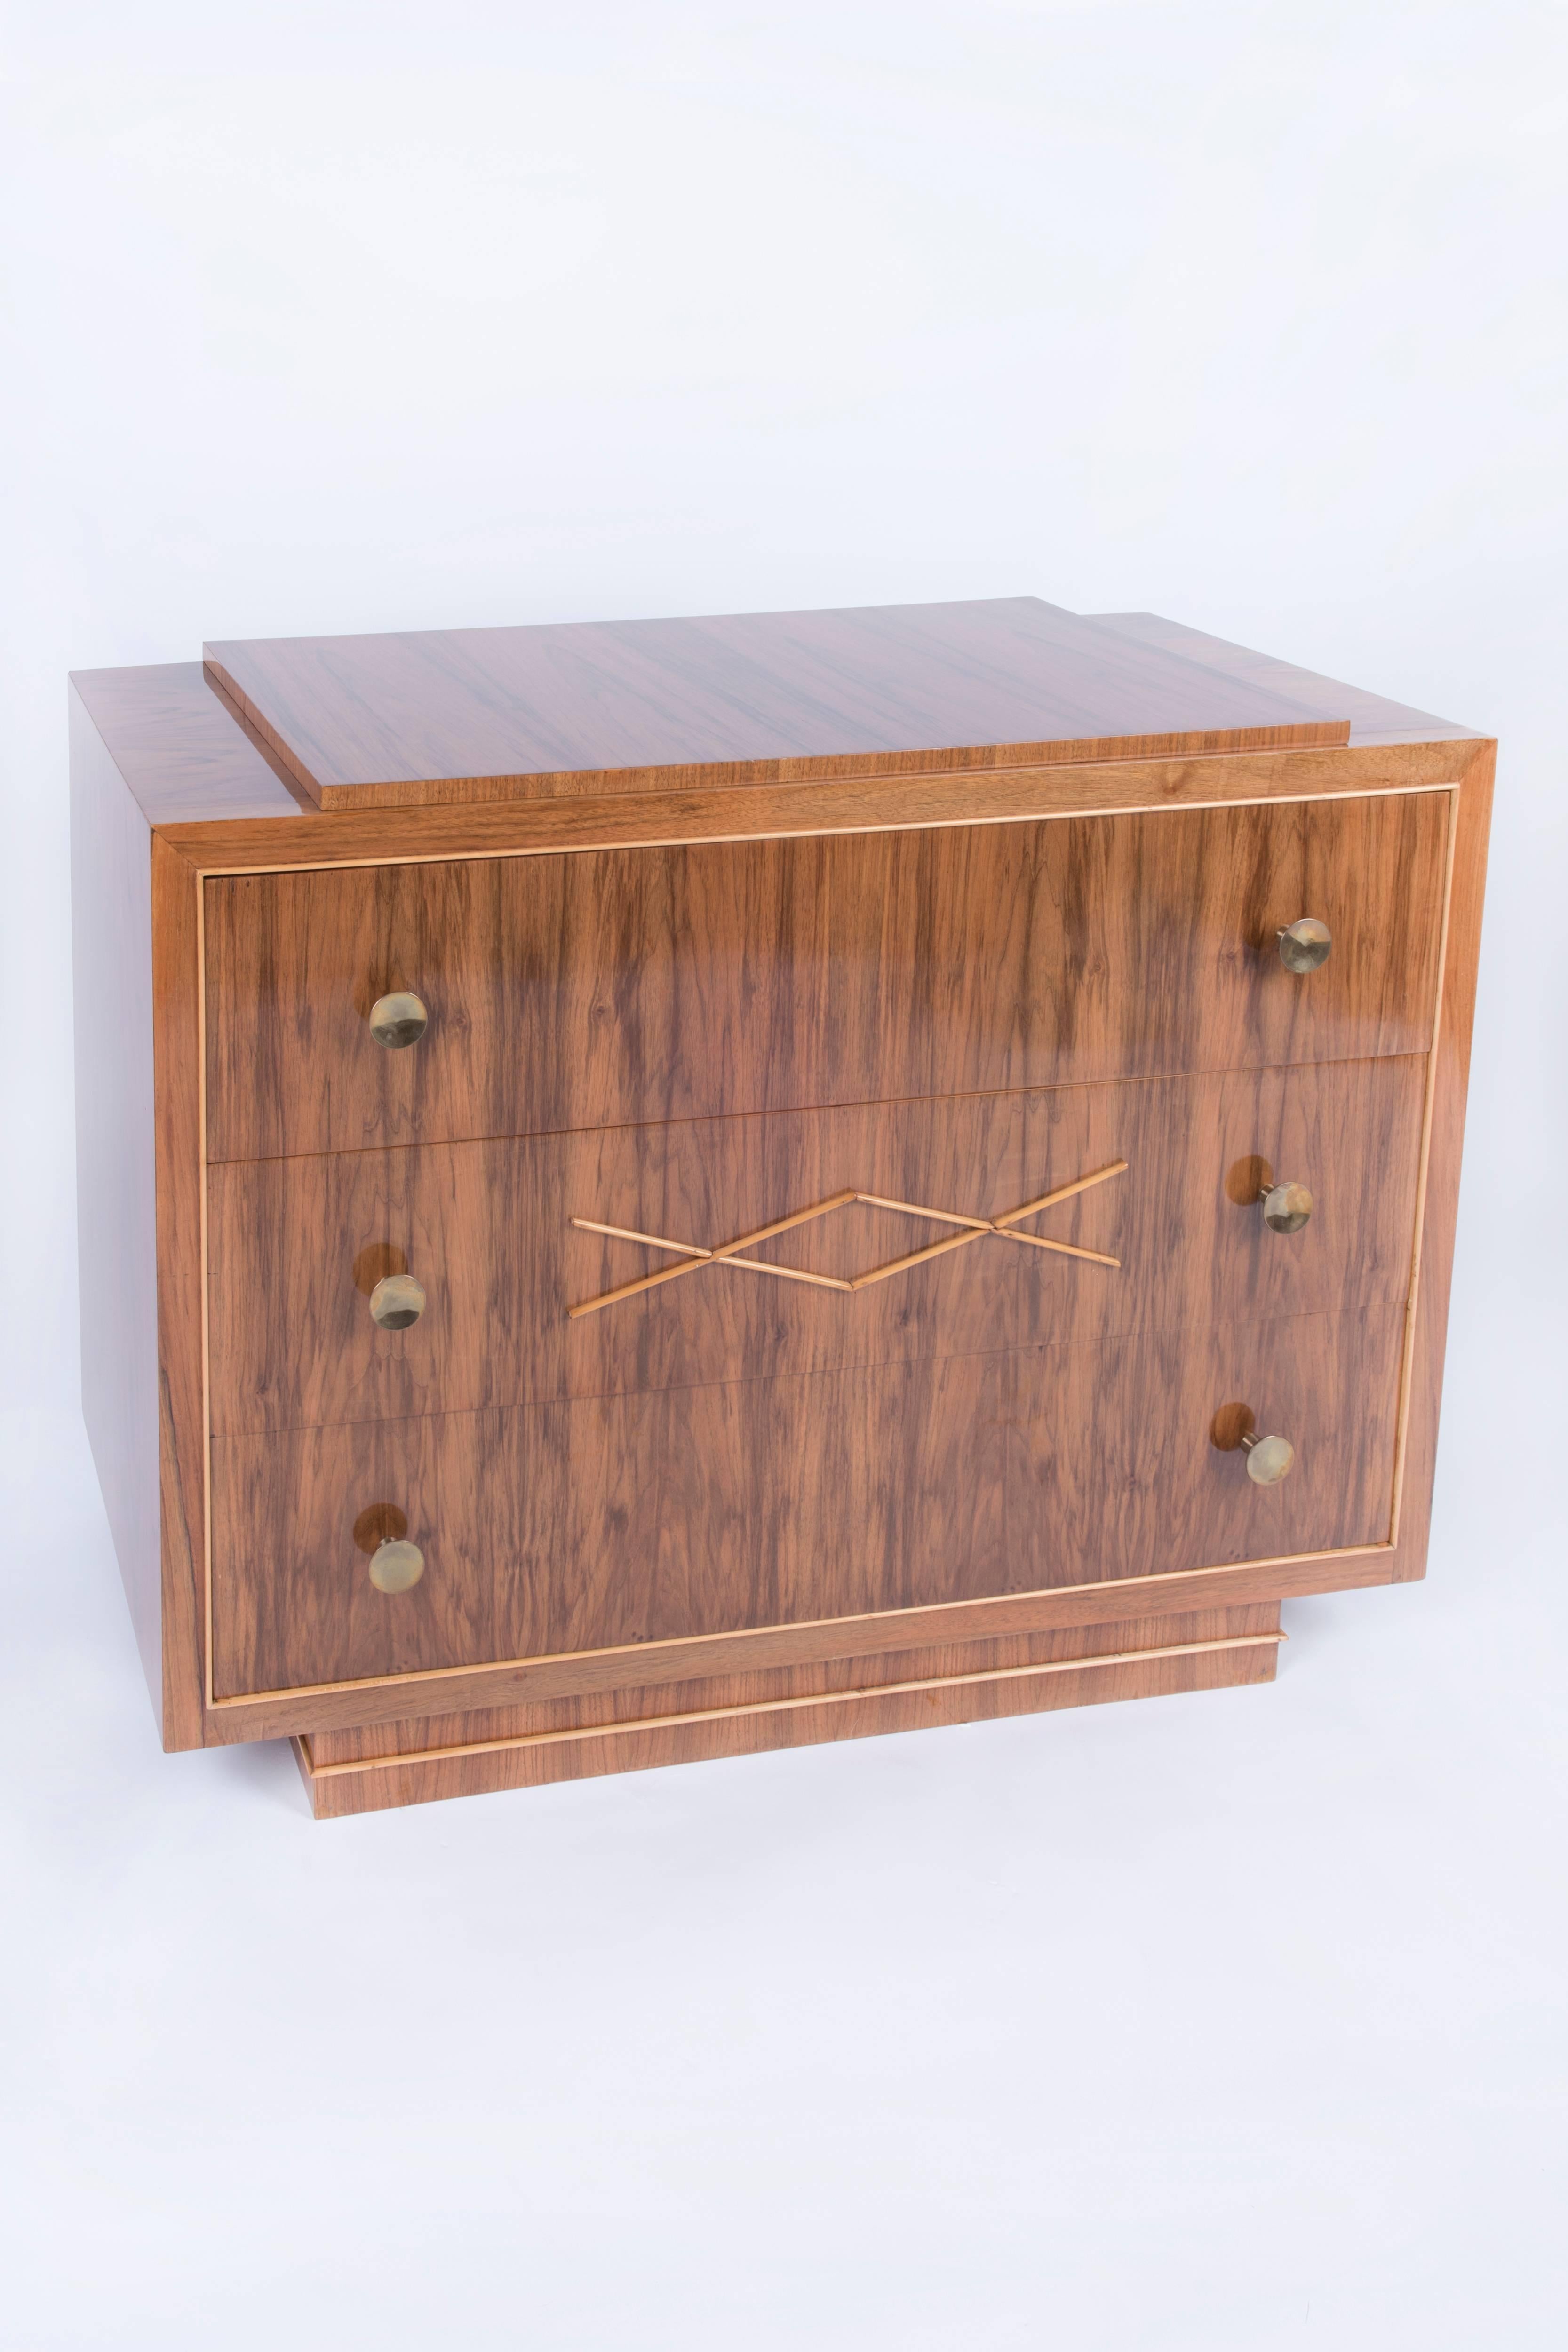 Walnut veneered, elegant Art Deco chest of drawers designed and manufactured by Josef De Coene en zon. Three big drawers with two brass handles on each.
The chest was restored and repolished with a lustrous handmade French polish, Belgian origin,